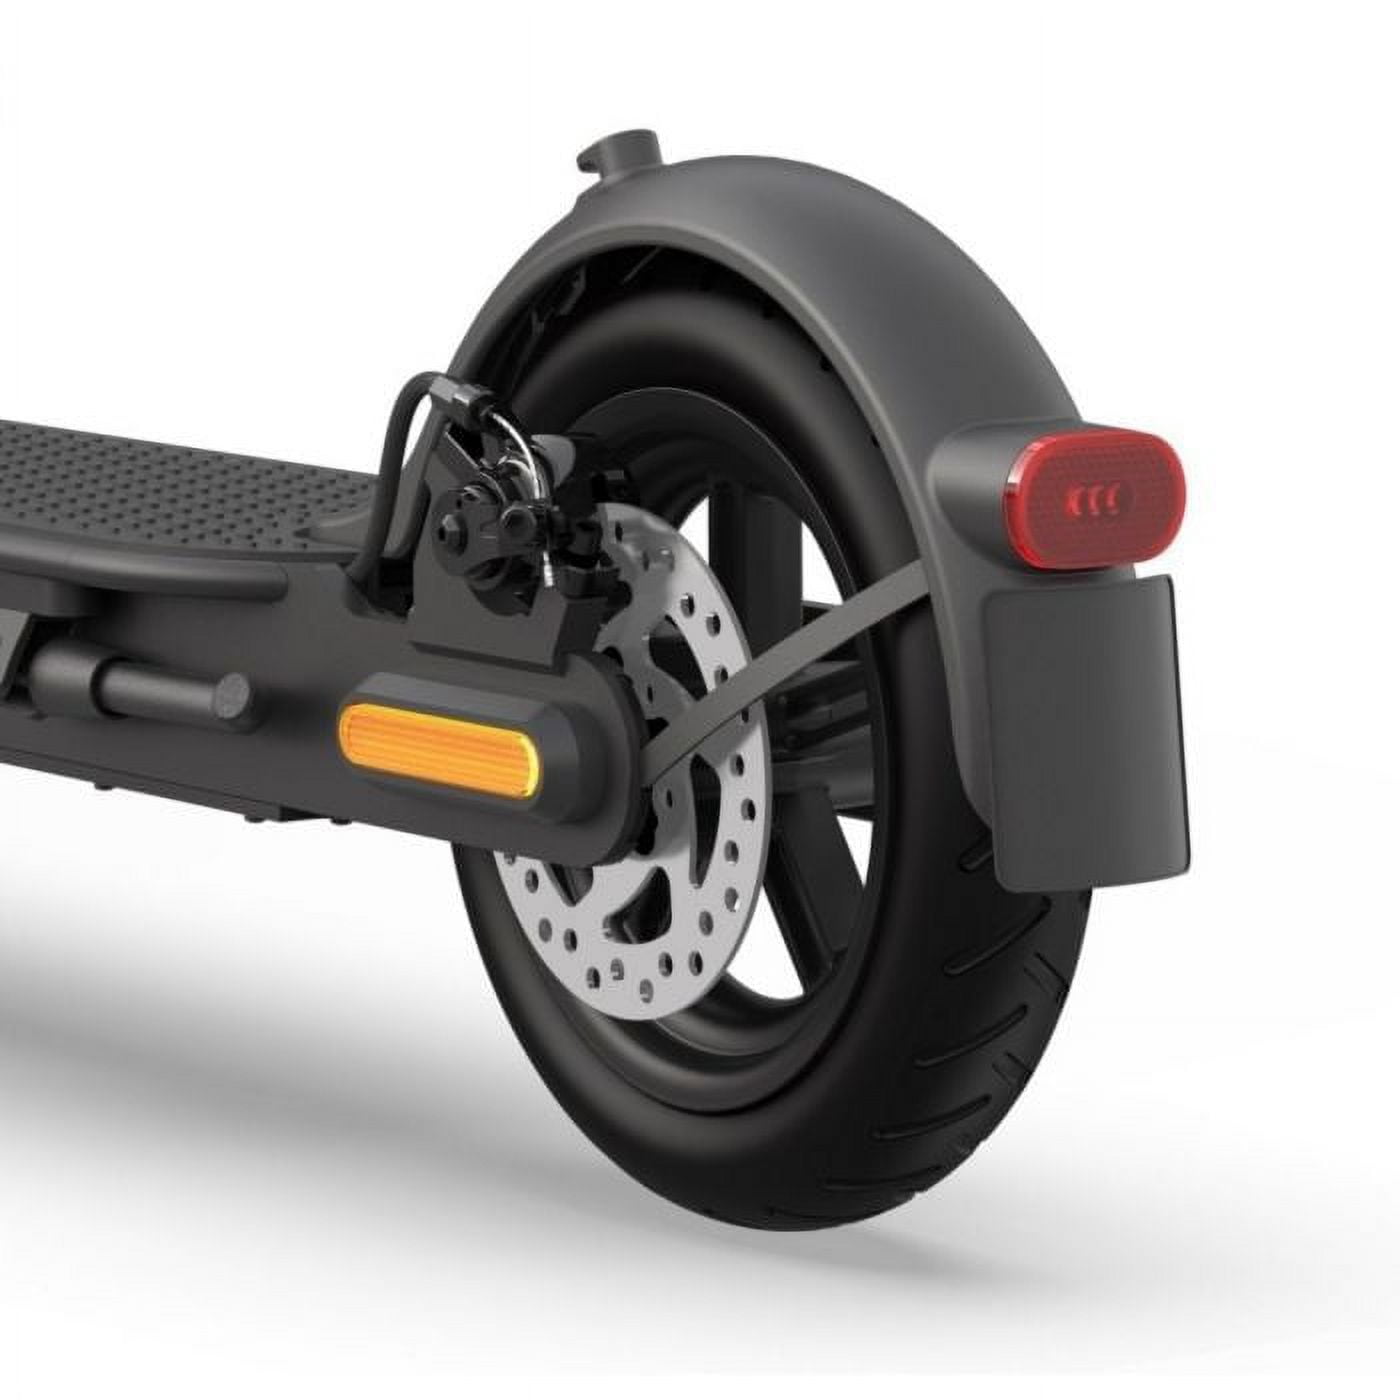 Mi Electric Scooter Pro 2 review: Several refinements improve upon